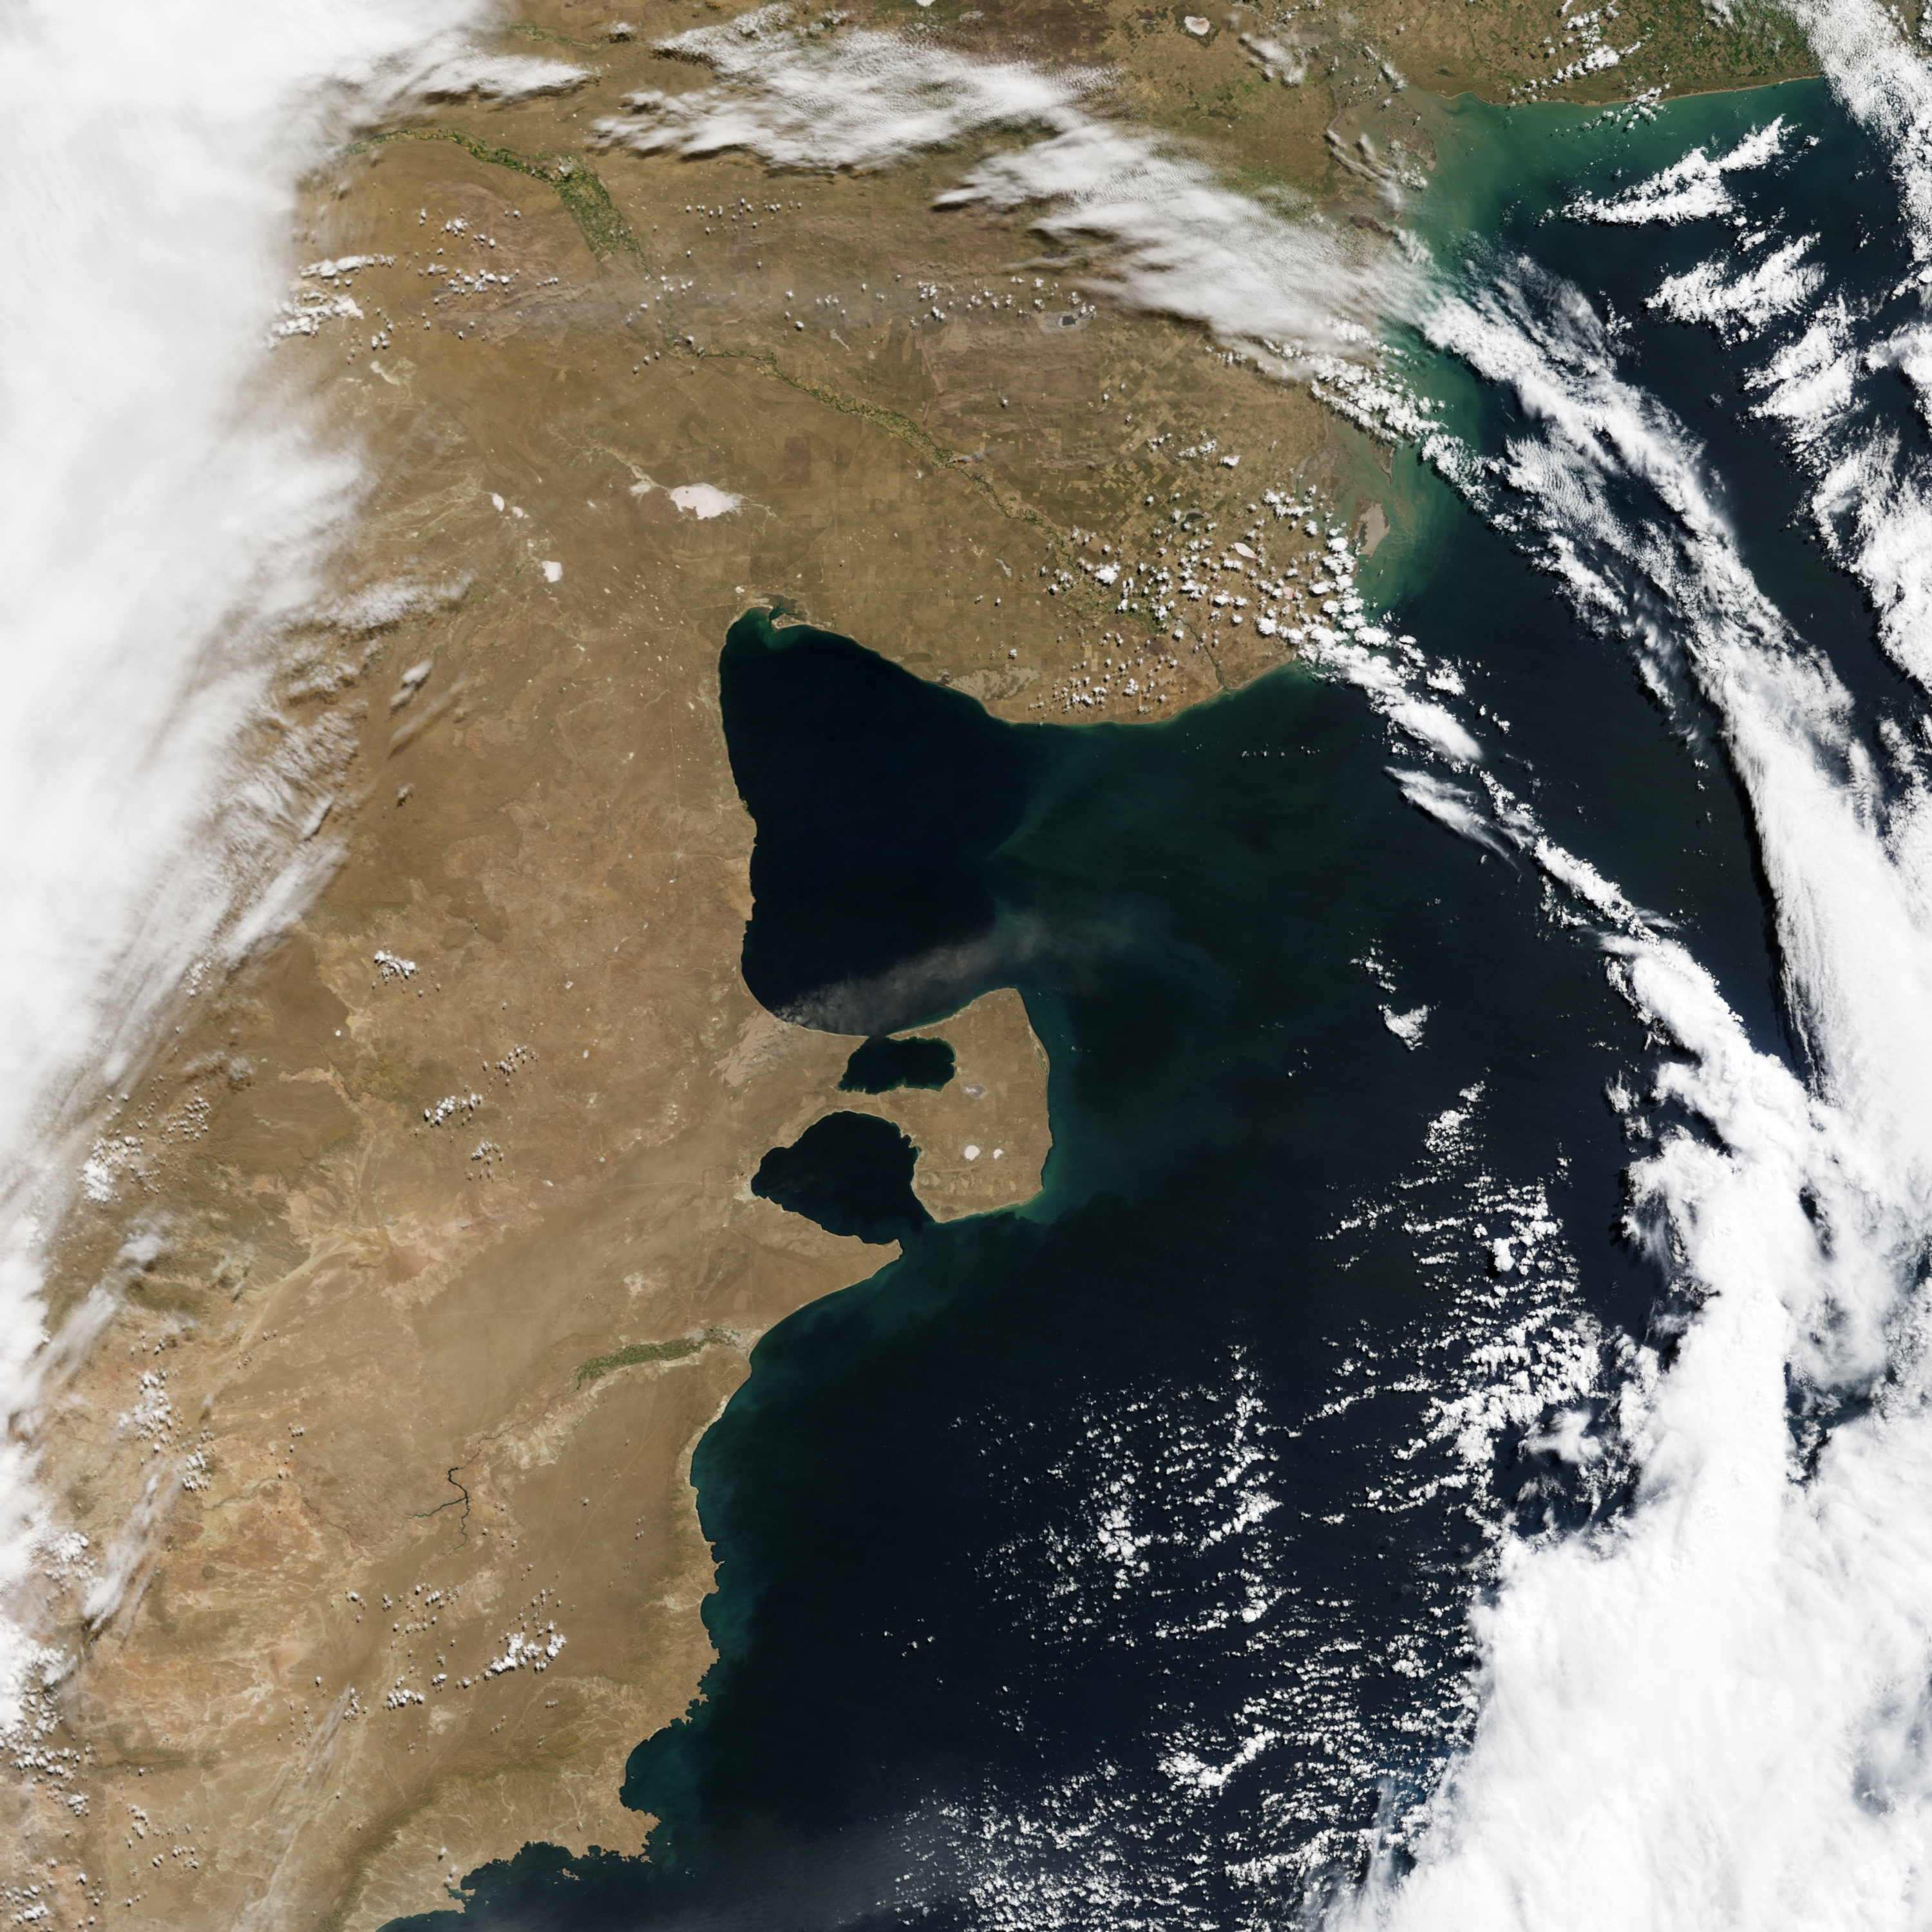 After Patagonian Fires, A Scar Remains - related image preview